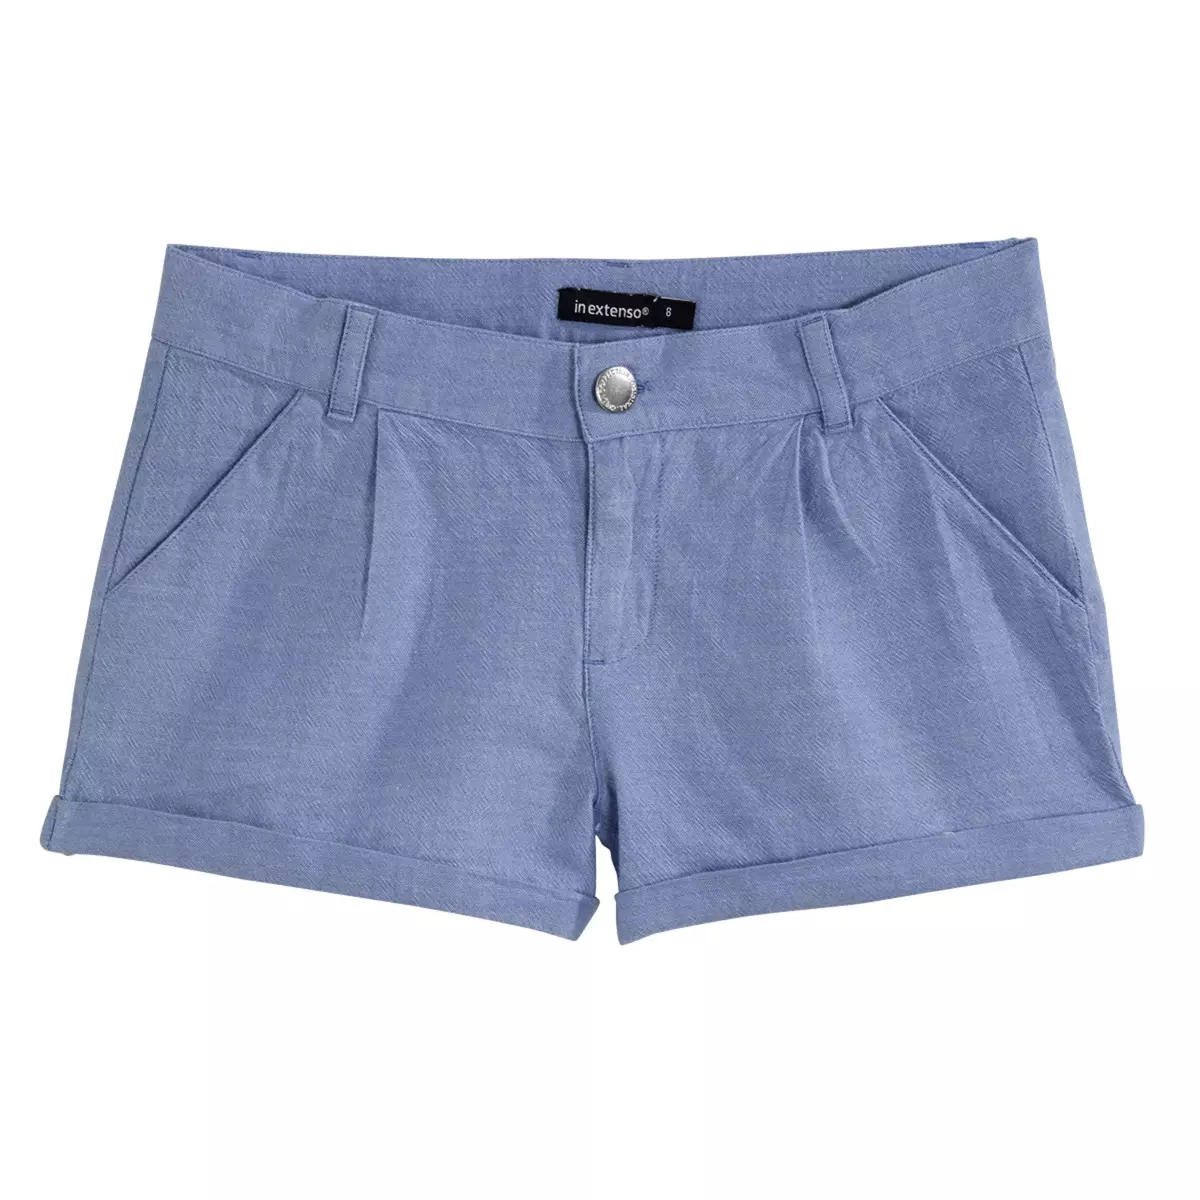 IN EXTENSO Short fille 